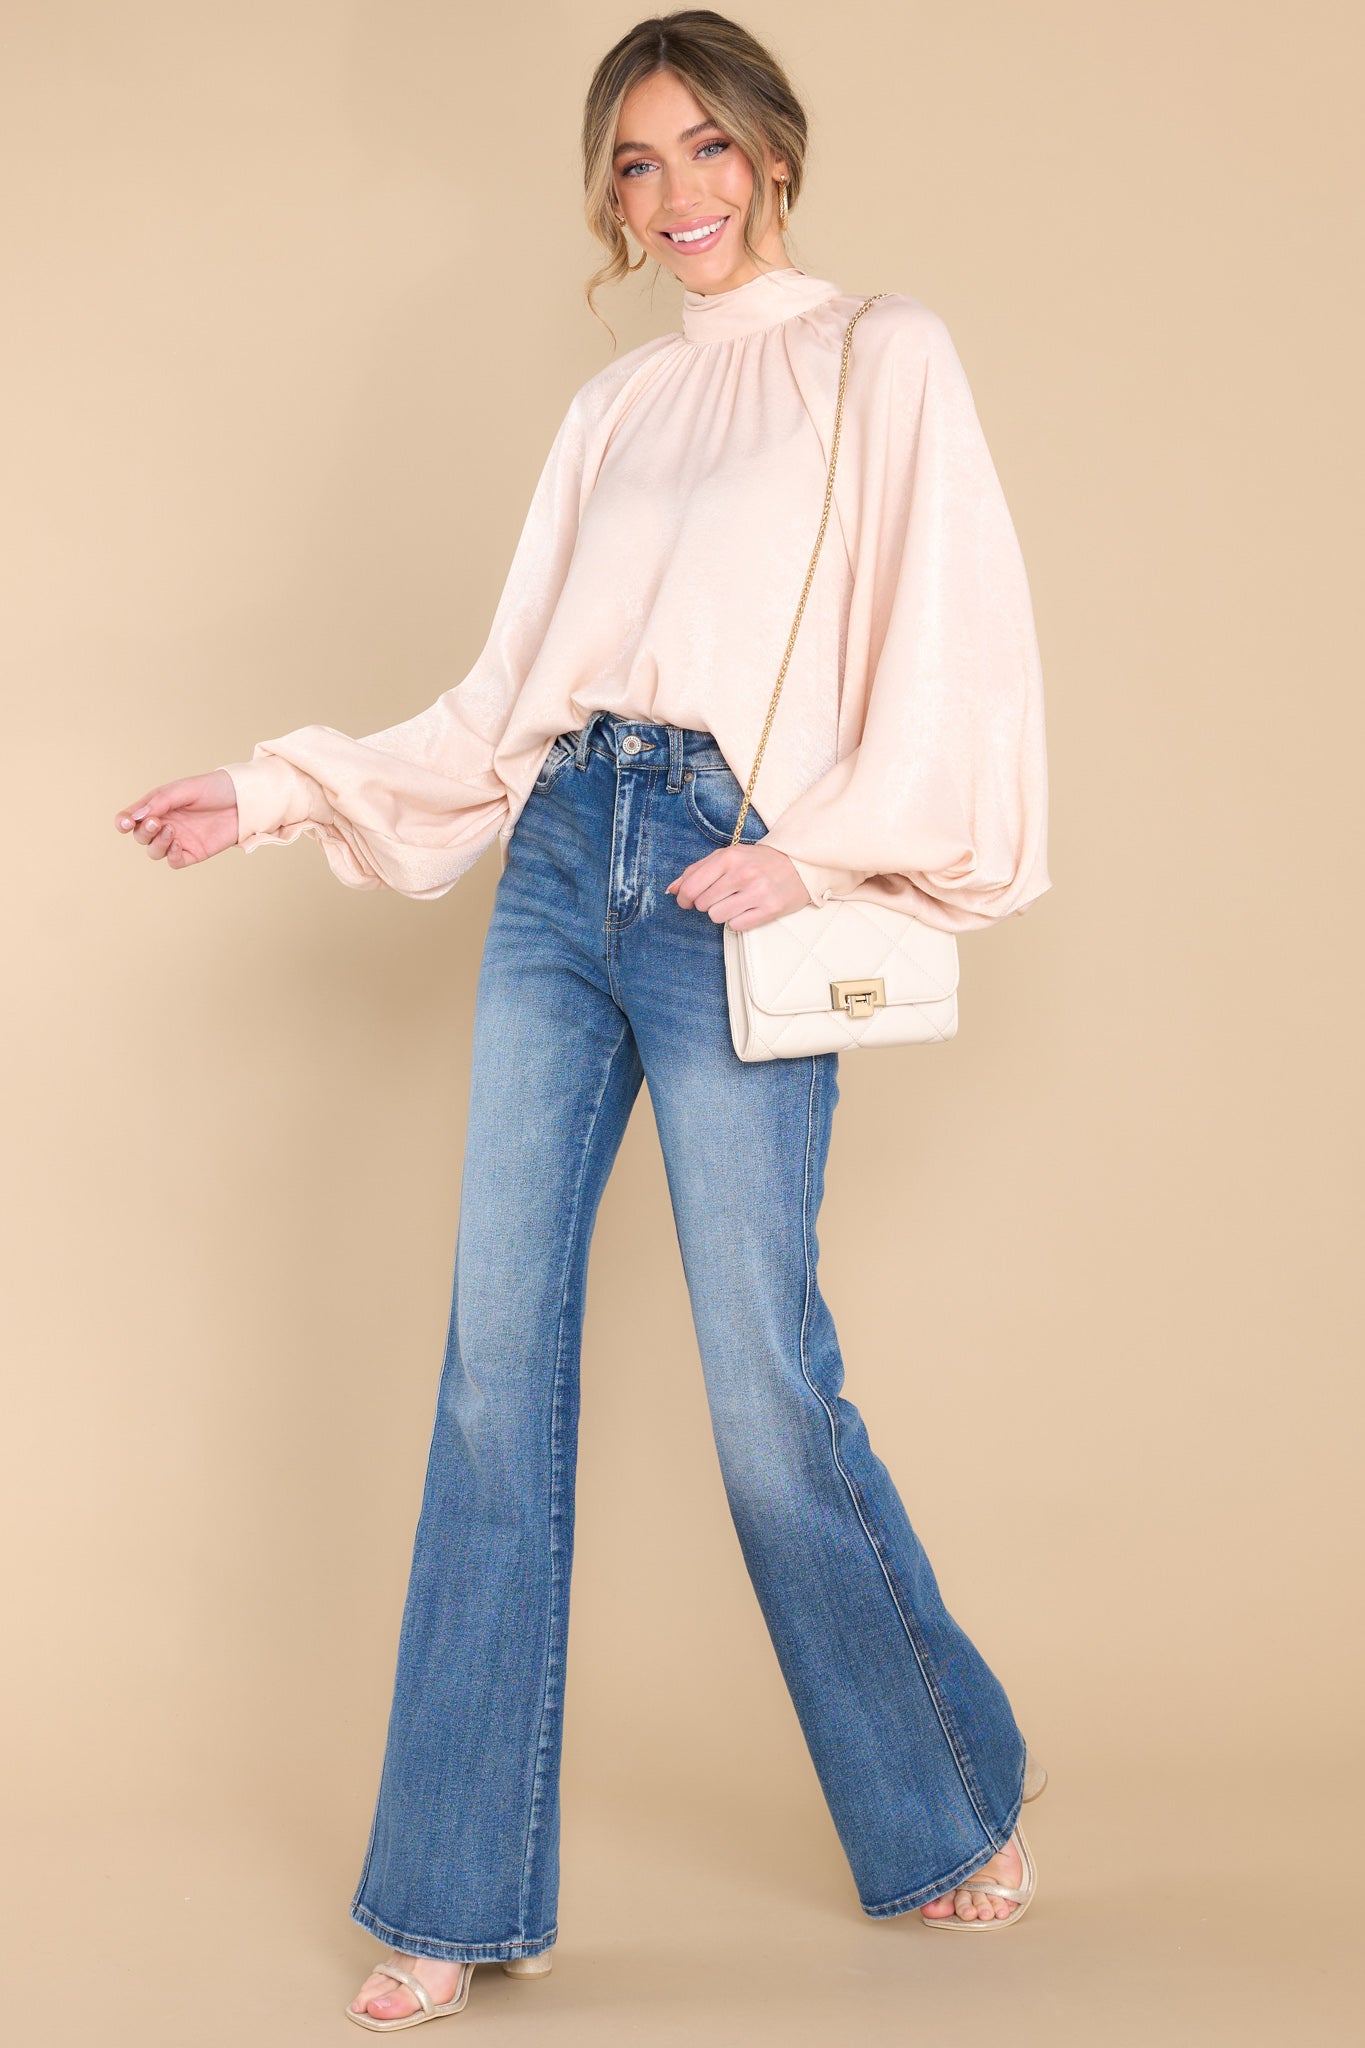 Waiting For The Sun Bells - ultimate high waisted flares and retro tee!  Love this look!